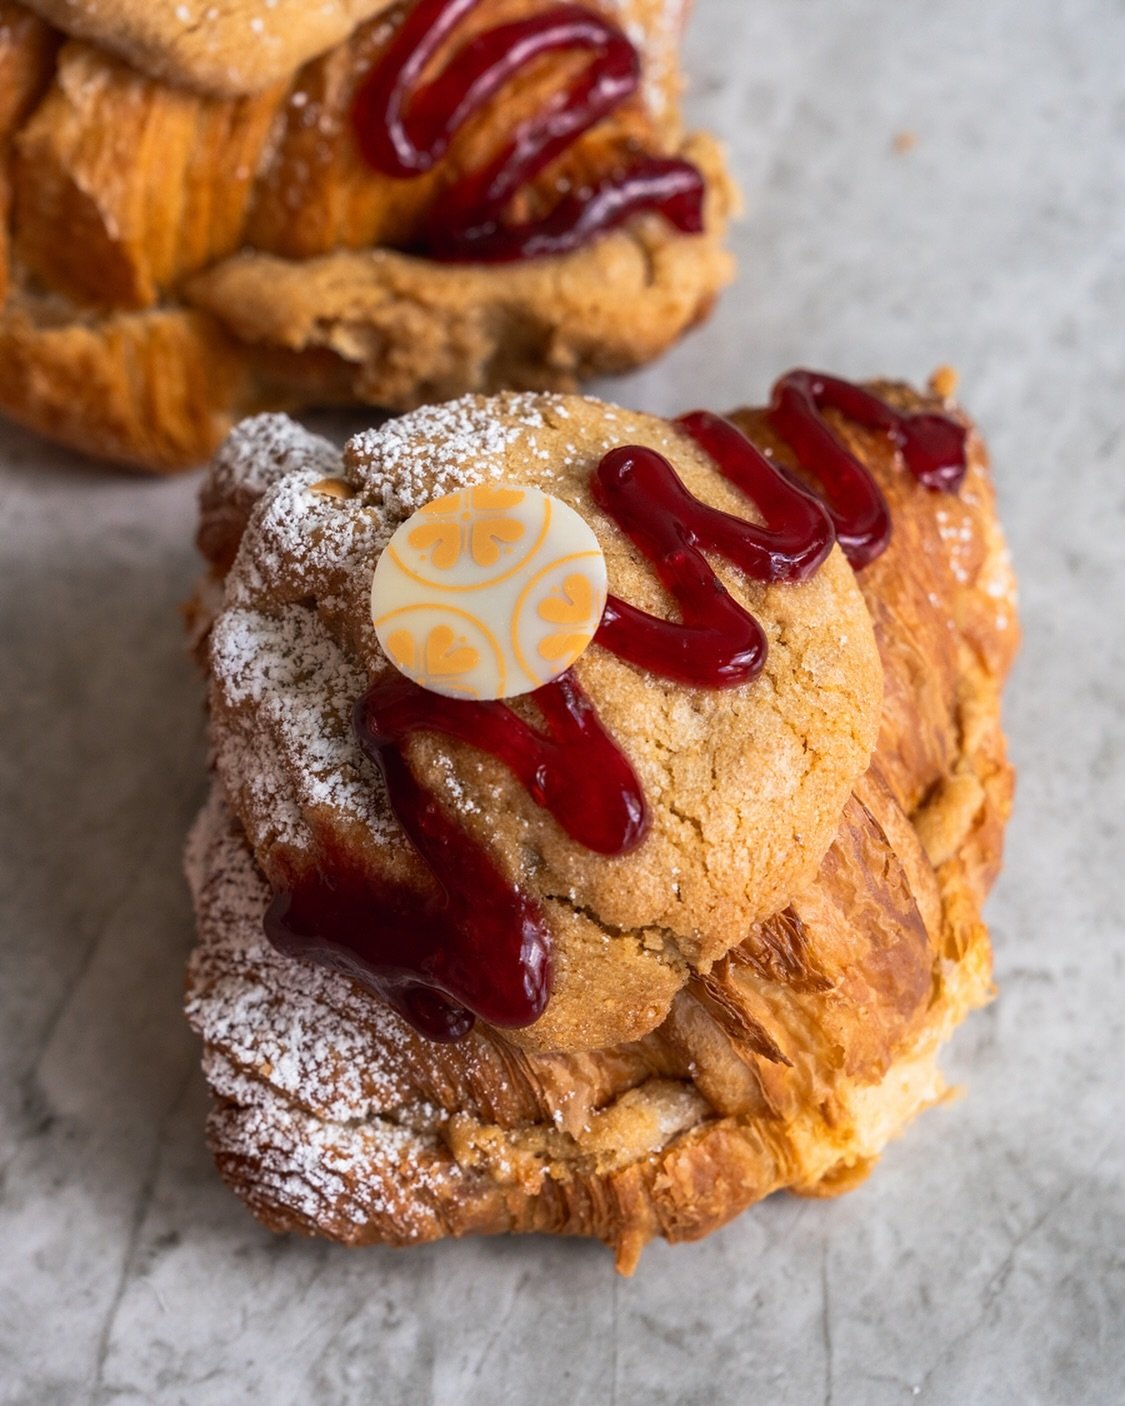 Our peanut butter and jelly sandwich cookie has been transformed into the PBJ cookie croissant featuring the classic butter croissant with peanut butter cookie dough, raspberry jam, and a light dusting of icing sugar.

#bakery #dishedvan #yvreats #va